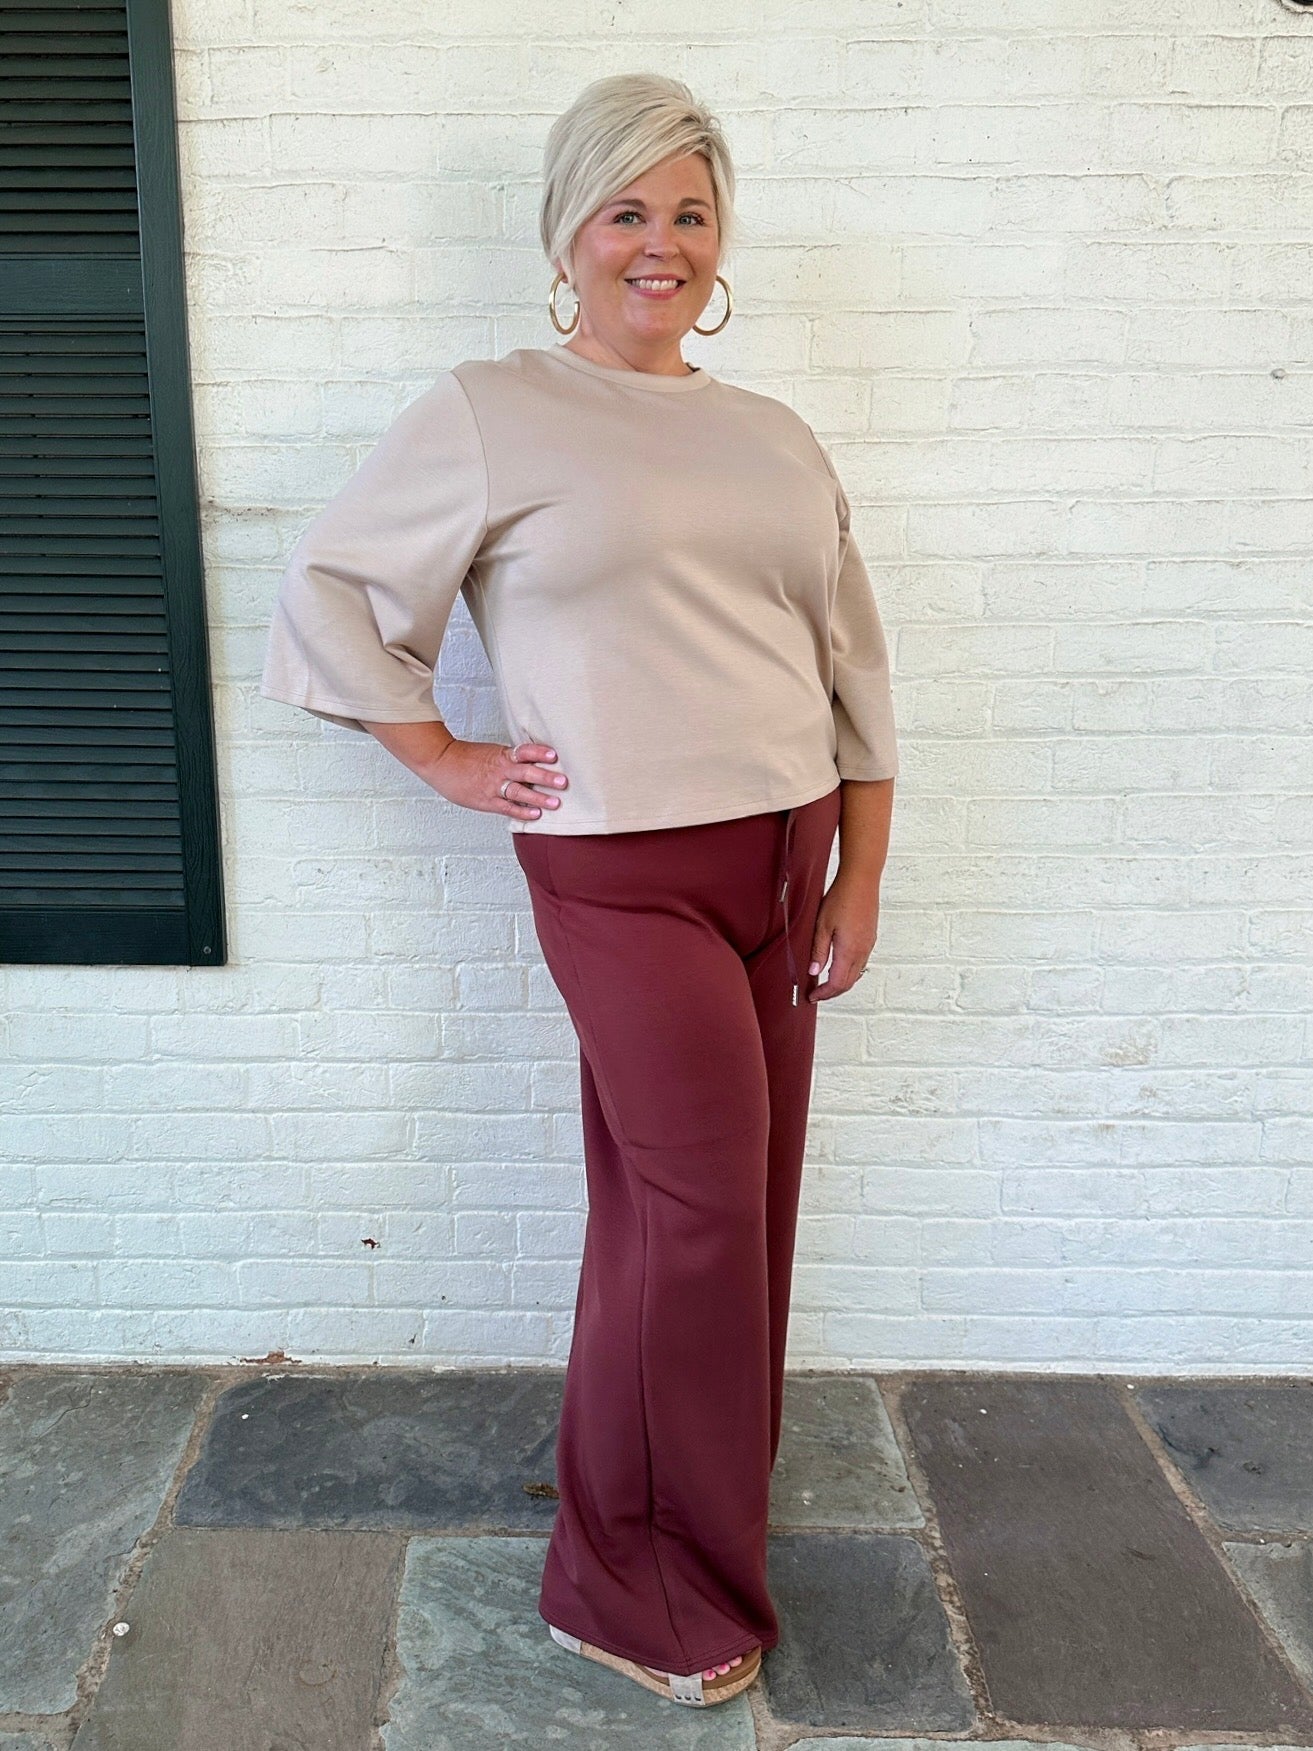 Spanx AirEssentials Wide Leg Pant Spice